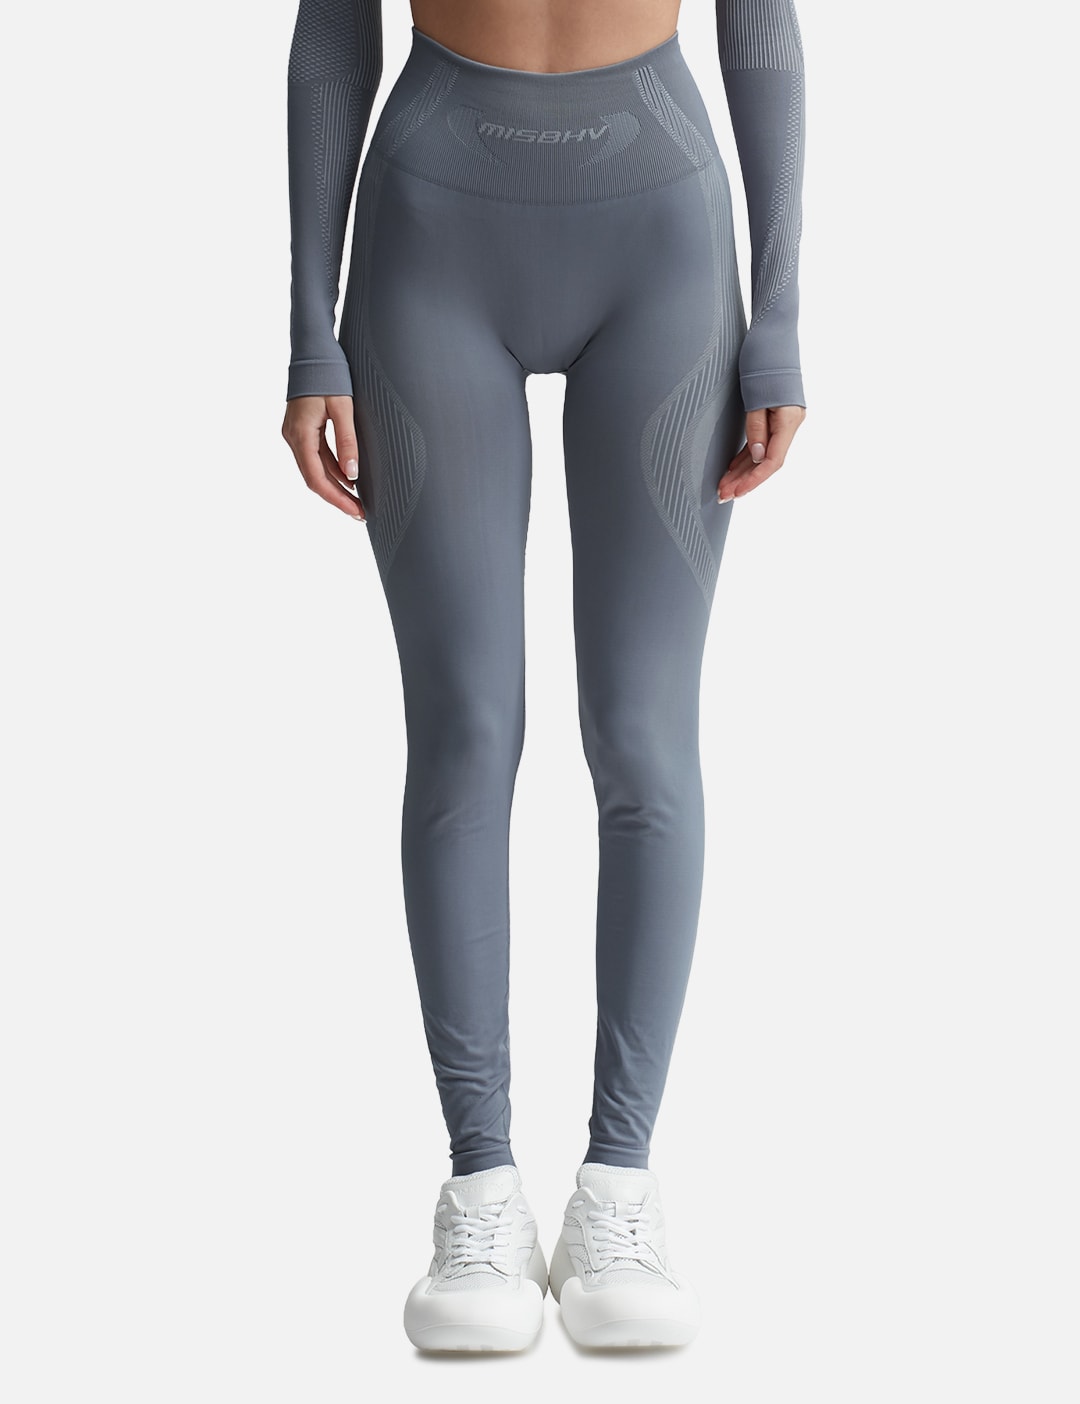 MUGLER - Glossy Embossed Leggings  HBX - Globally Curated Fashion and  Lifestyle by Hypebeast